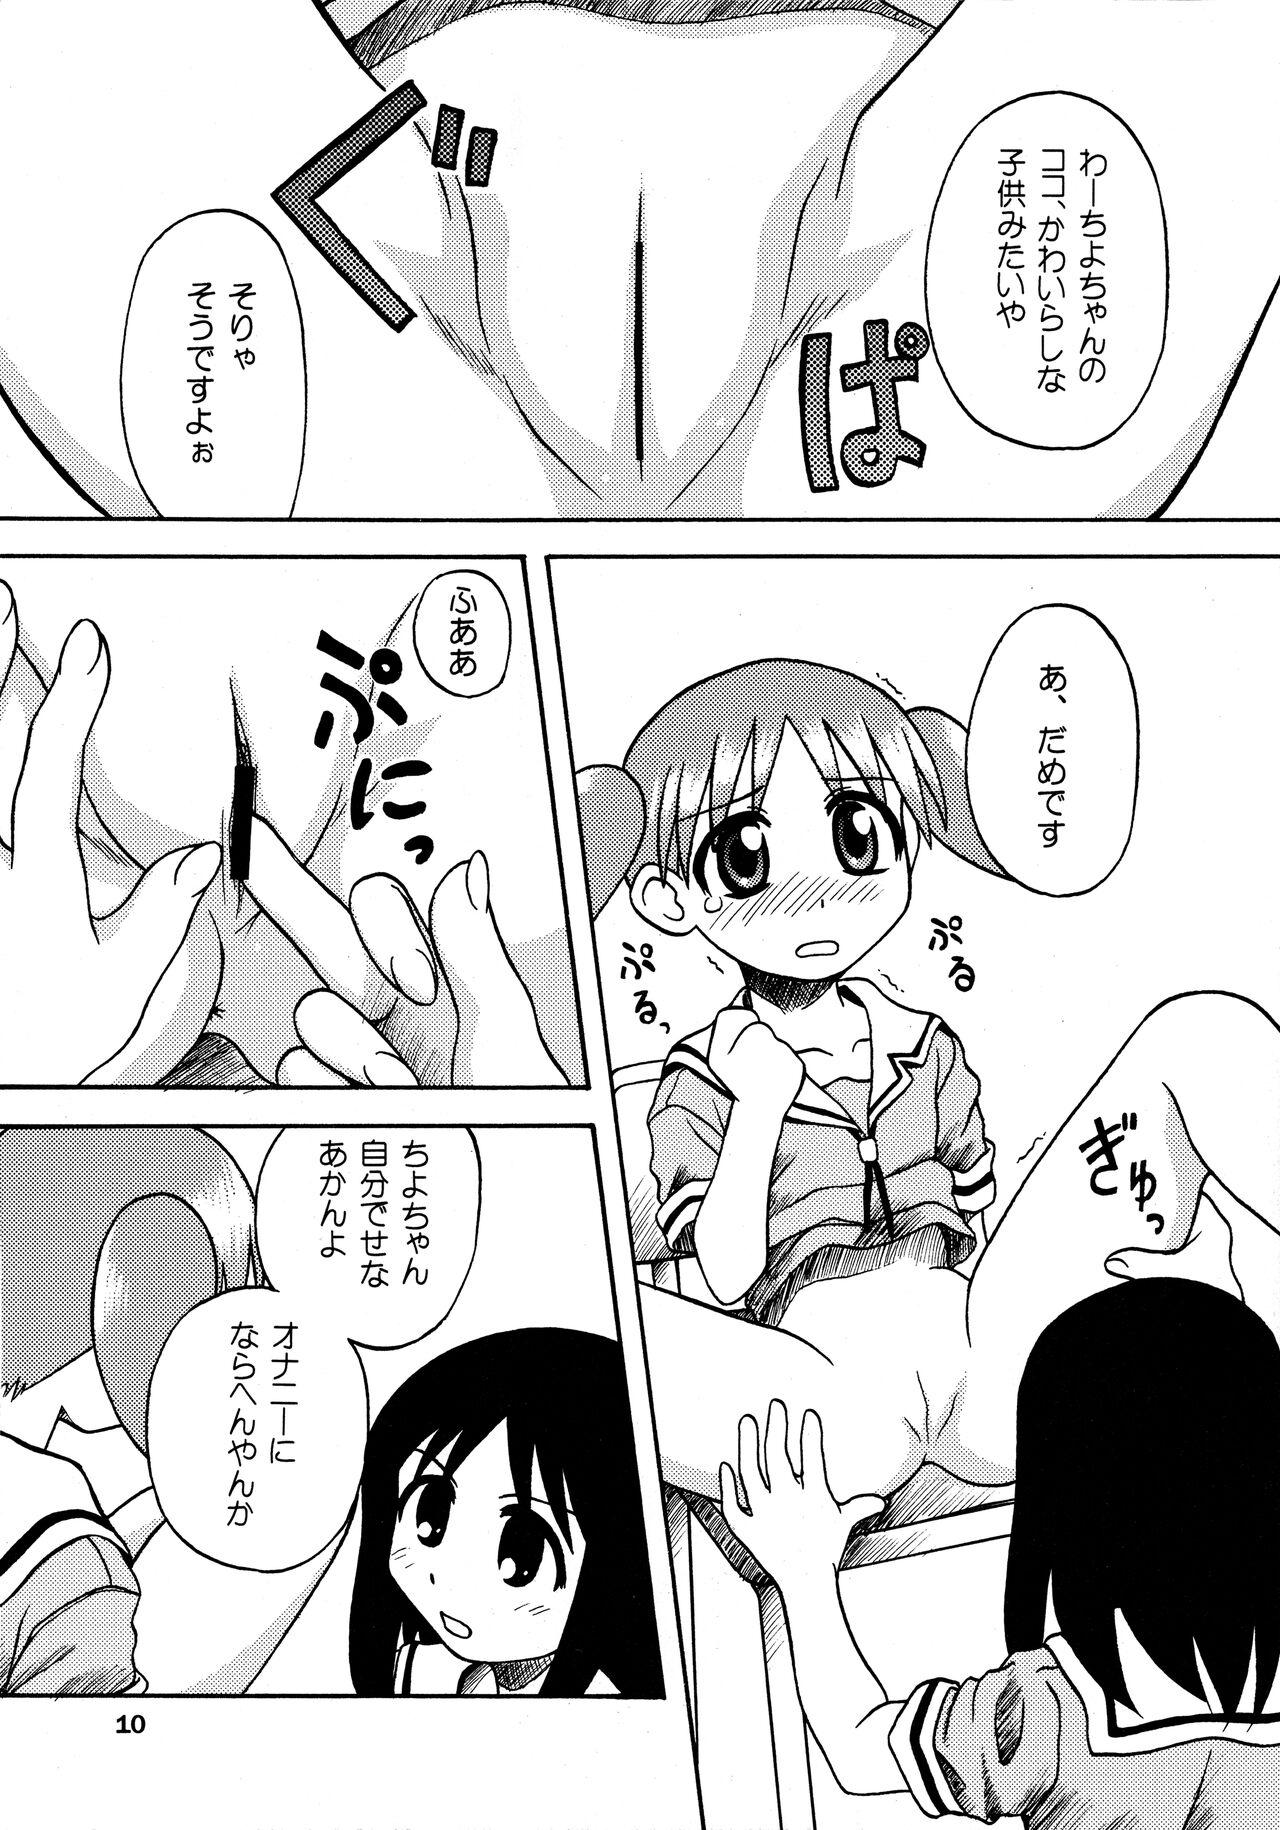 Hood ANOTHER LIFE - Azumanga daioh Pack - Page 10